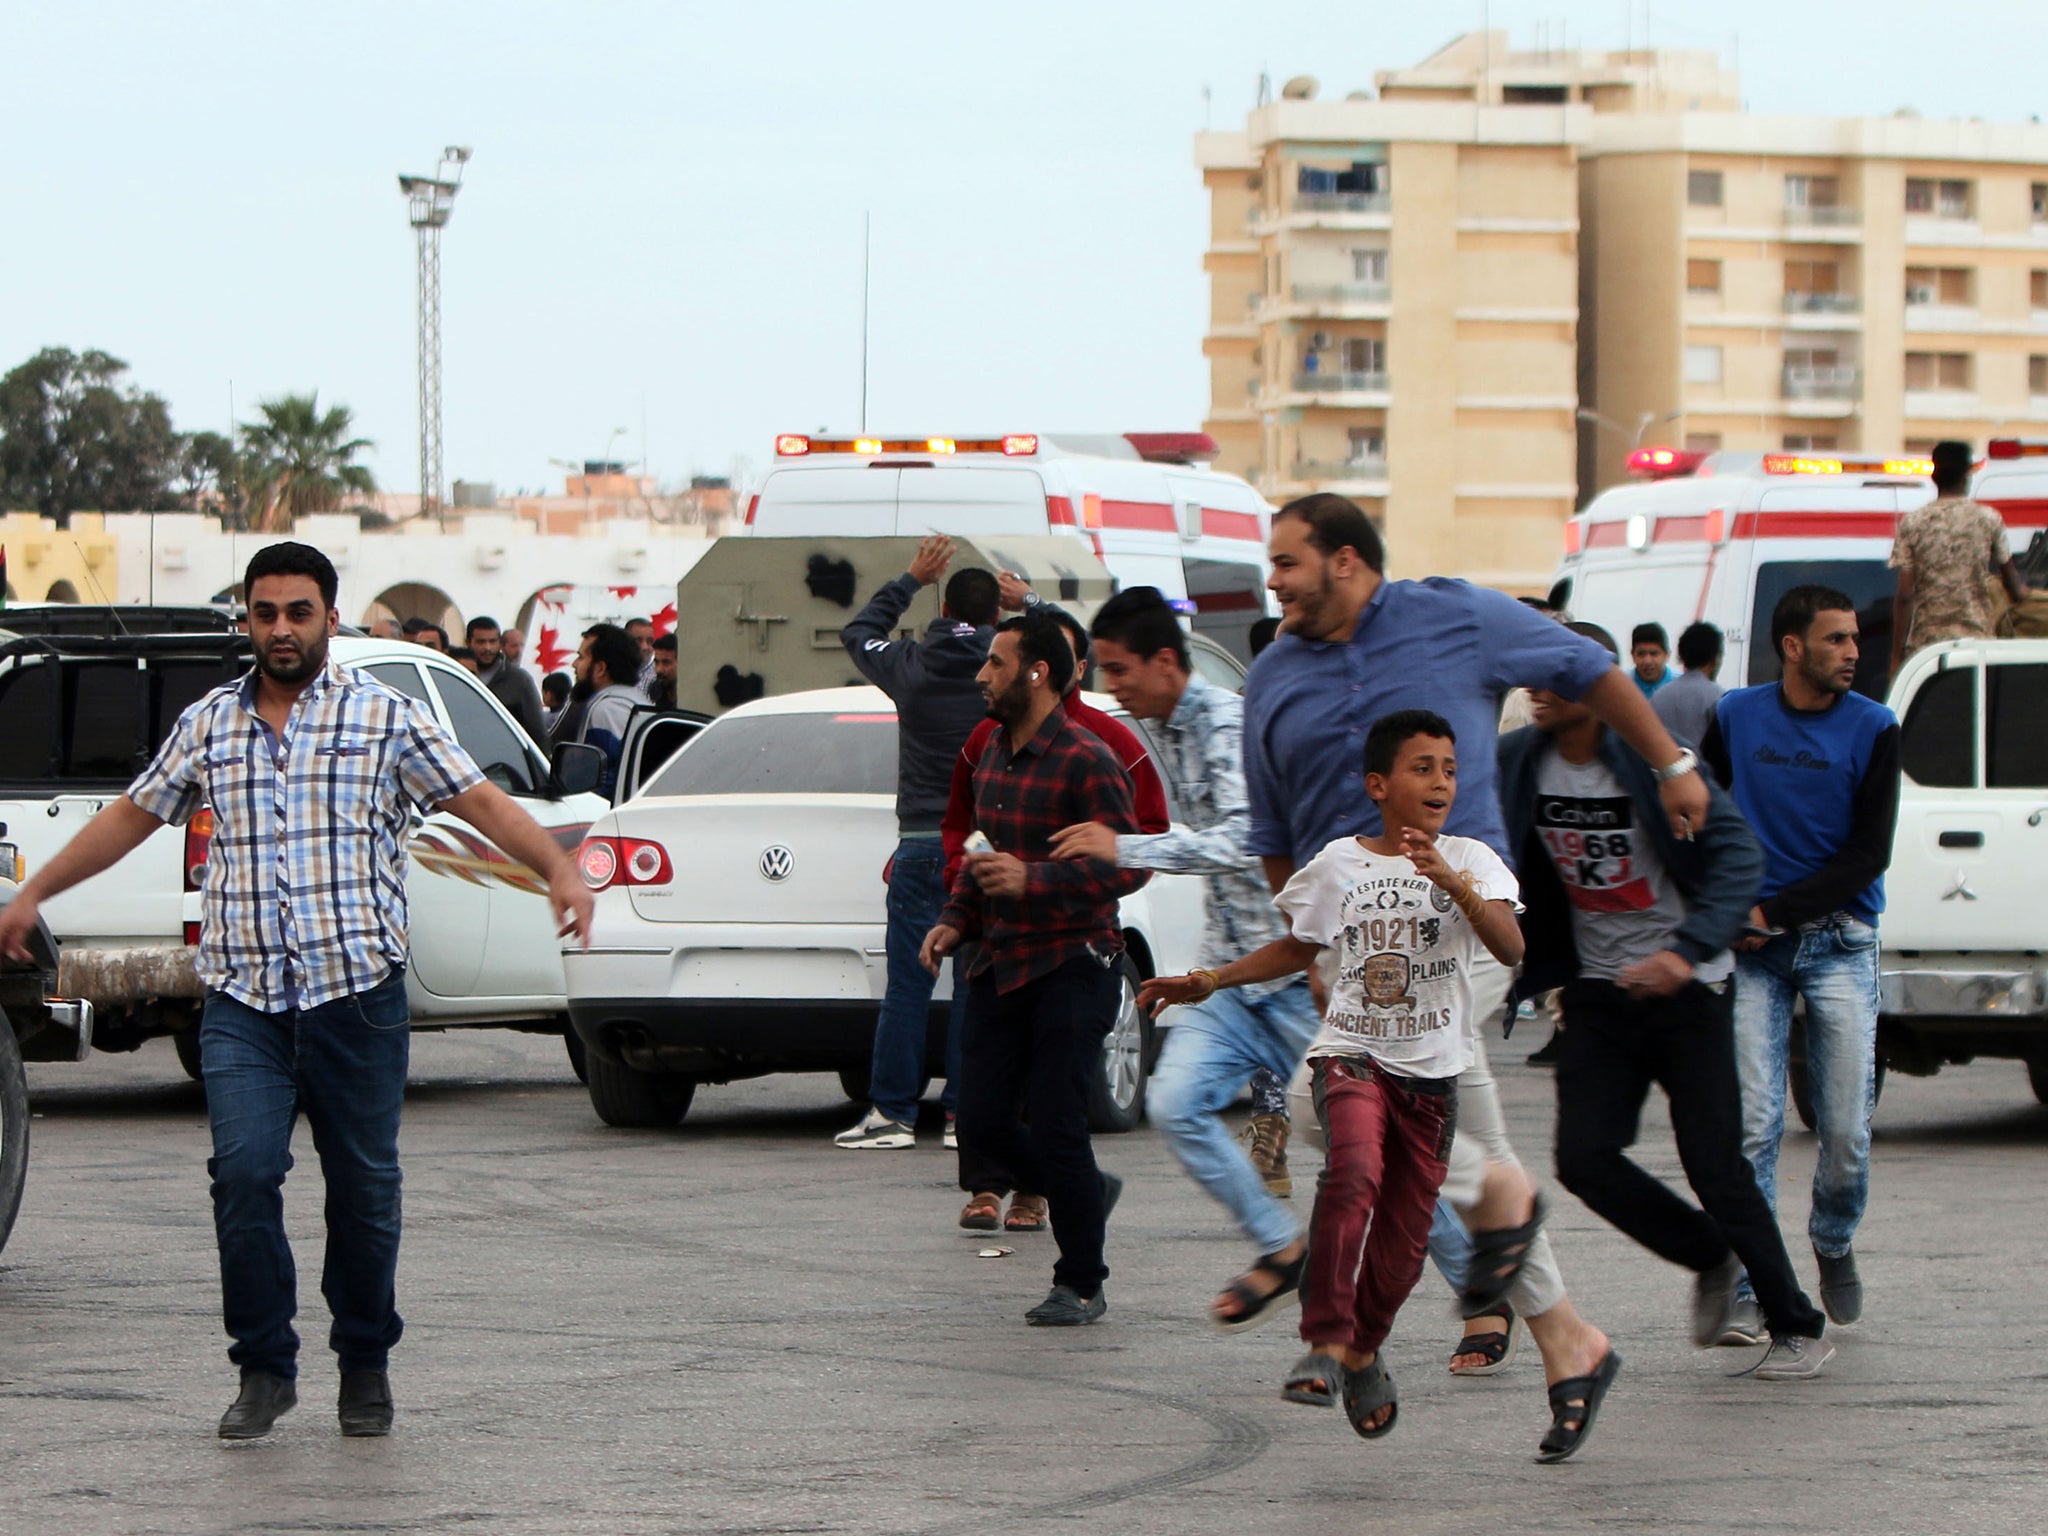 Libyans fleeing shelling at protest in Benghazi. Protesters were calling for Libyan forces to recapture the southern city of Sirte